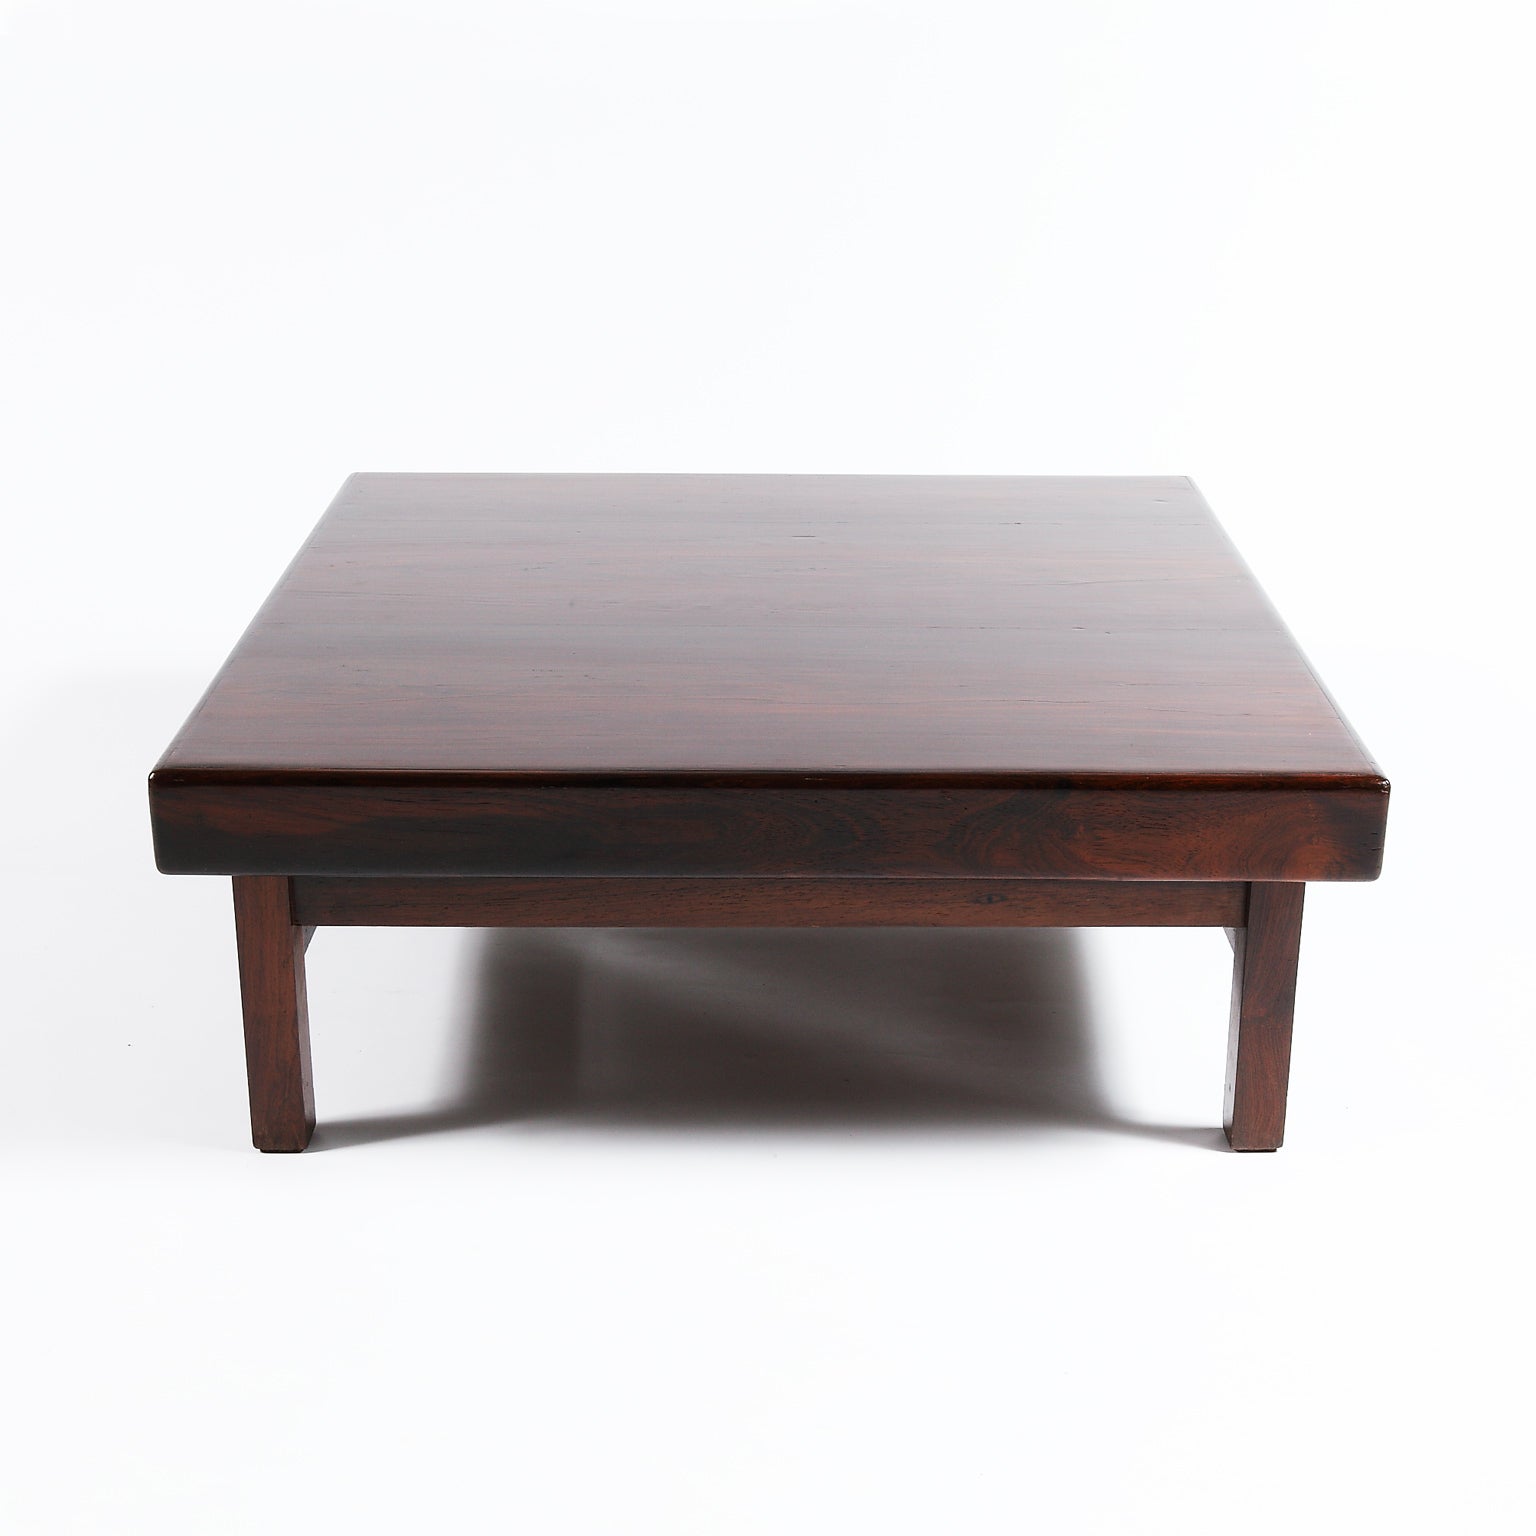 "Vianna" Coffee Table by Sergio Rodrigues